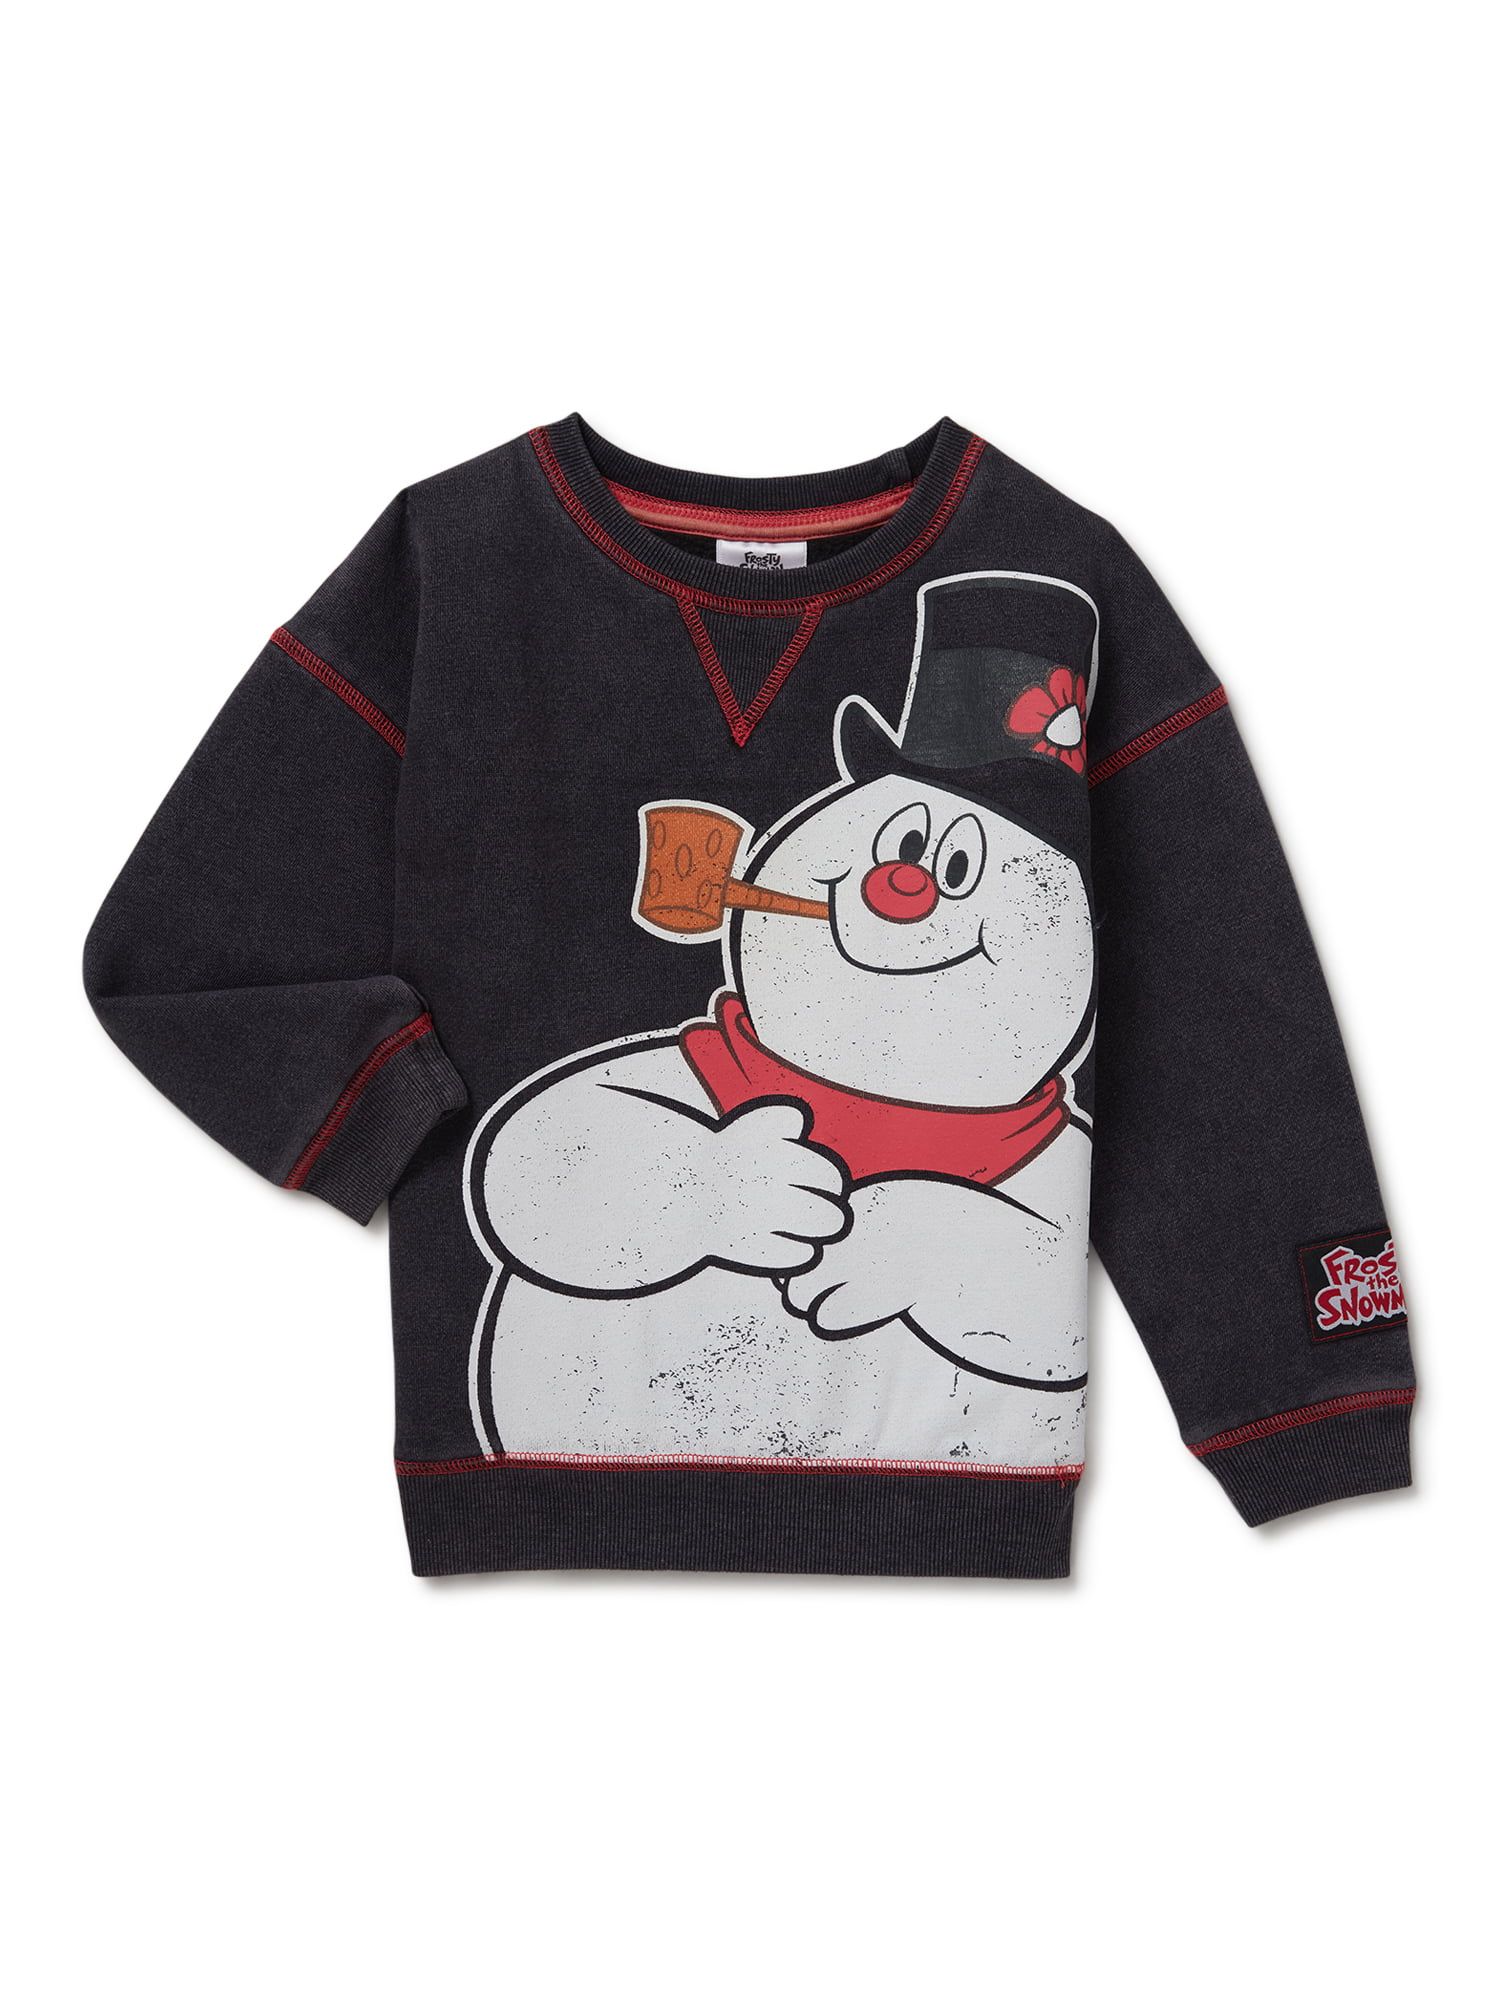 Frosty the Snowman Baby and Toddler Girl Crewneck Holiday Sweatshirt, Sizes 12M-5T | Walmart (US)